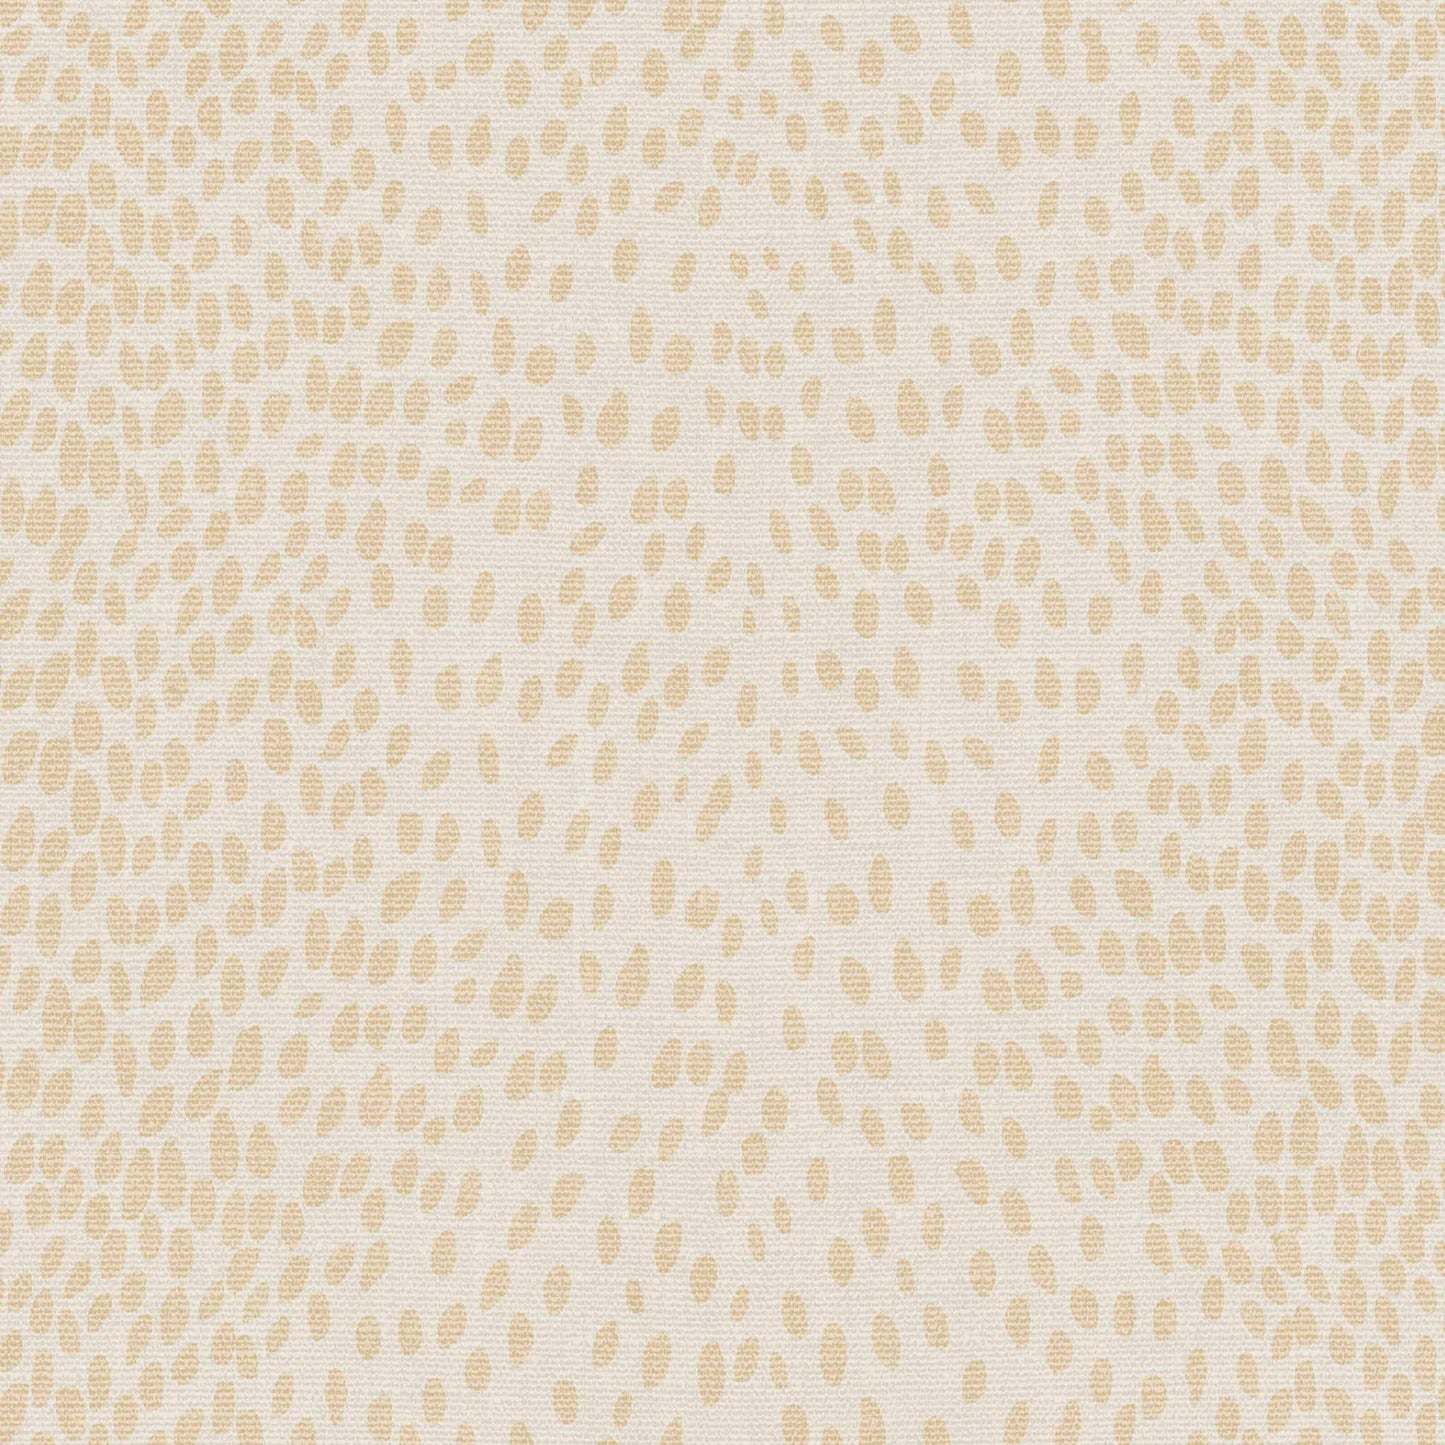 Leopard tan wall treatment looks great in offices, bedrooms, and nurseries.